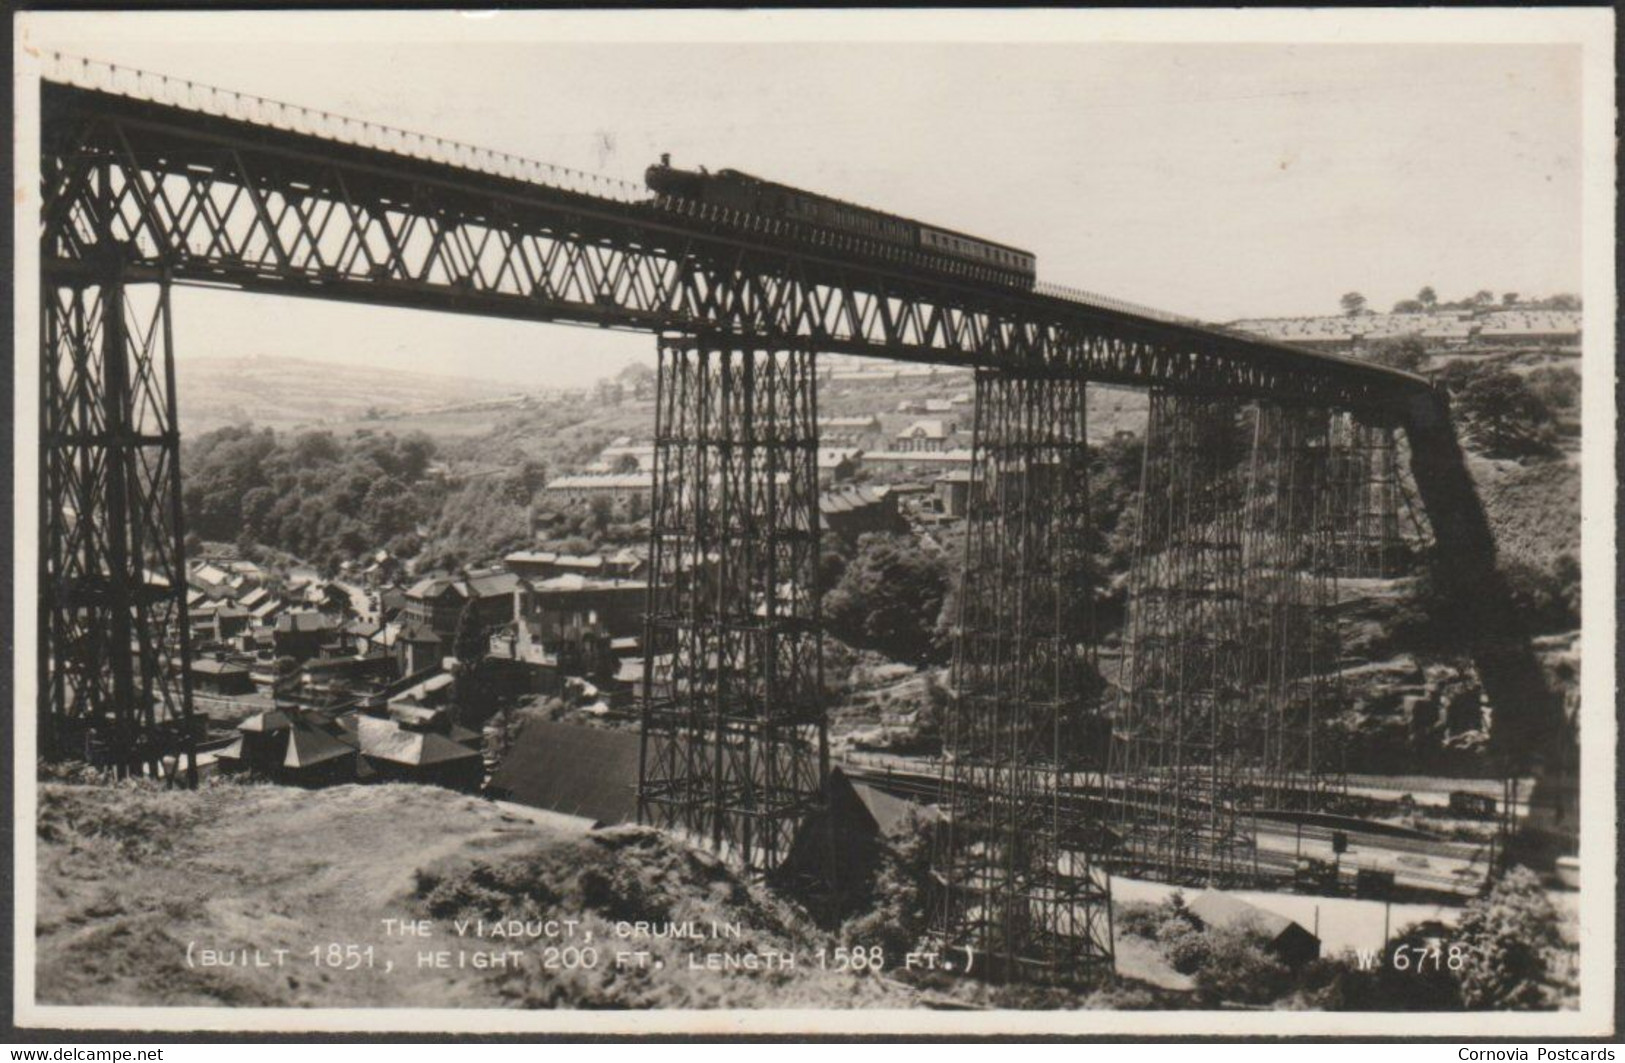 The Viaduct, Crumlin, Monmouthshire, 1958 - Valentine's RP Postcard - Monmouthshire